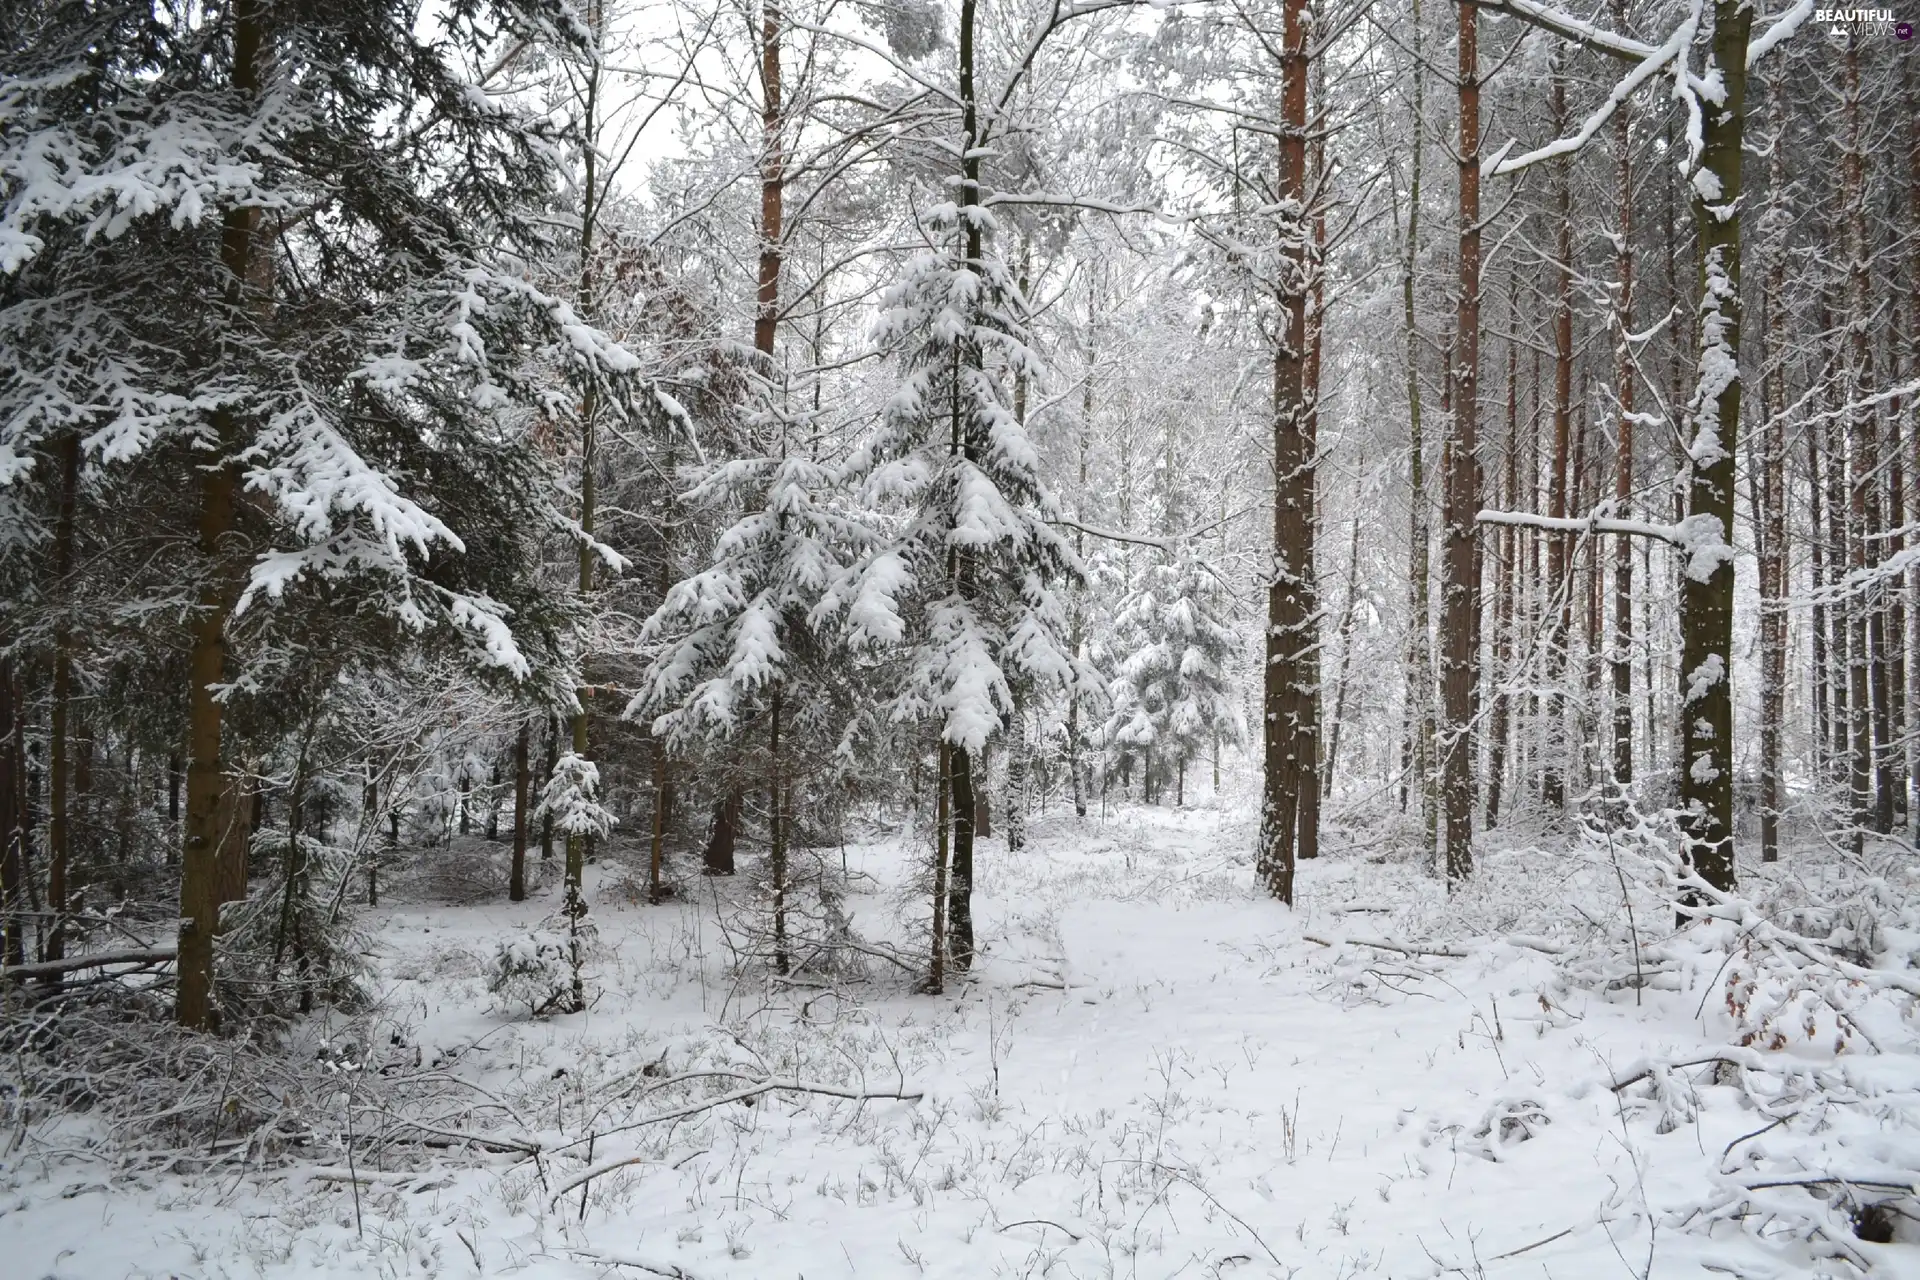 snow, winter, forest